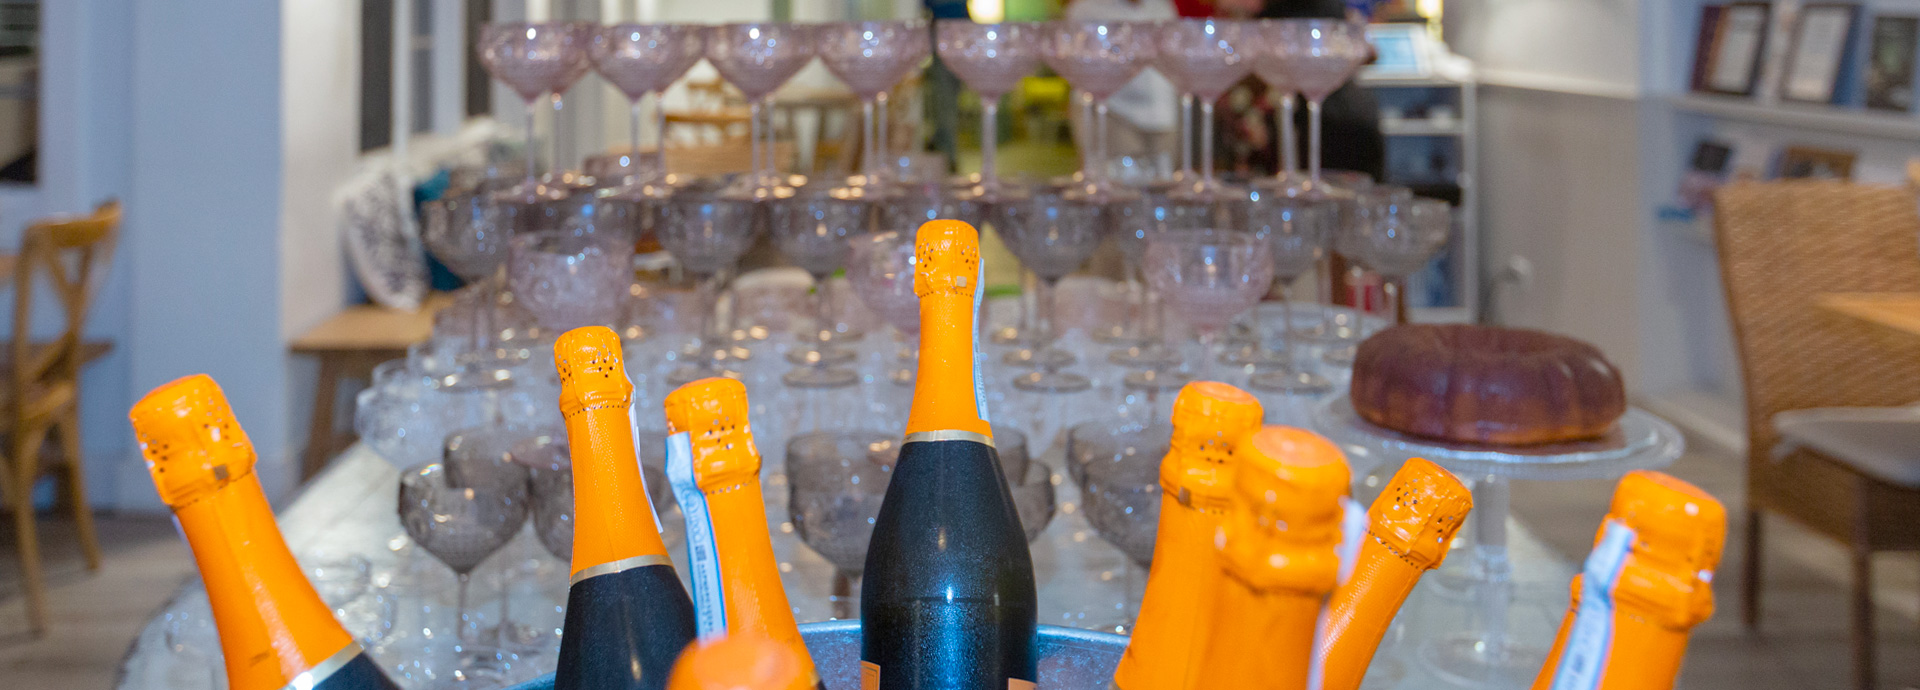 close up of some champagne bottles and glasses in the background